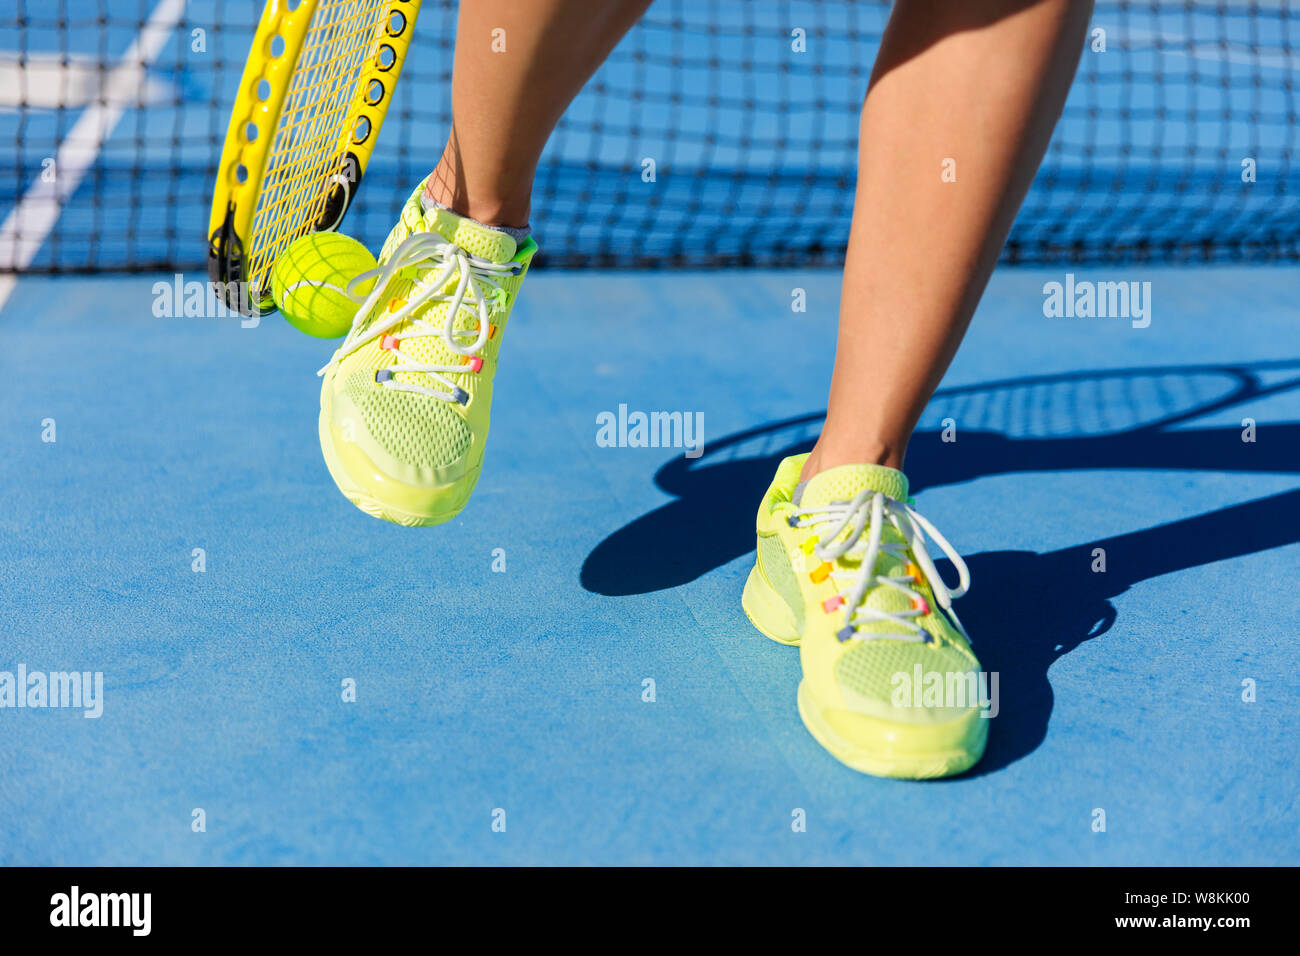 Sports athlete picking up ball with tennis racket. Female player using a technique with her running shoes to pick up during game on blue hard court. Closeup of feet, neon yellow fashion footwear. Stock Photo